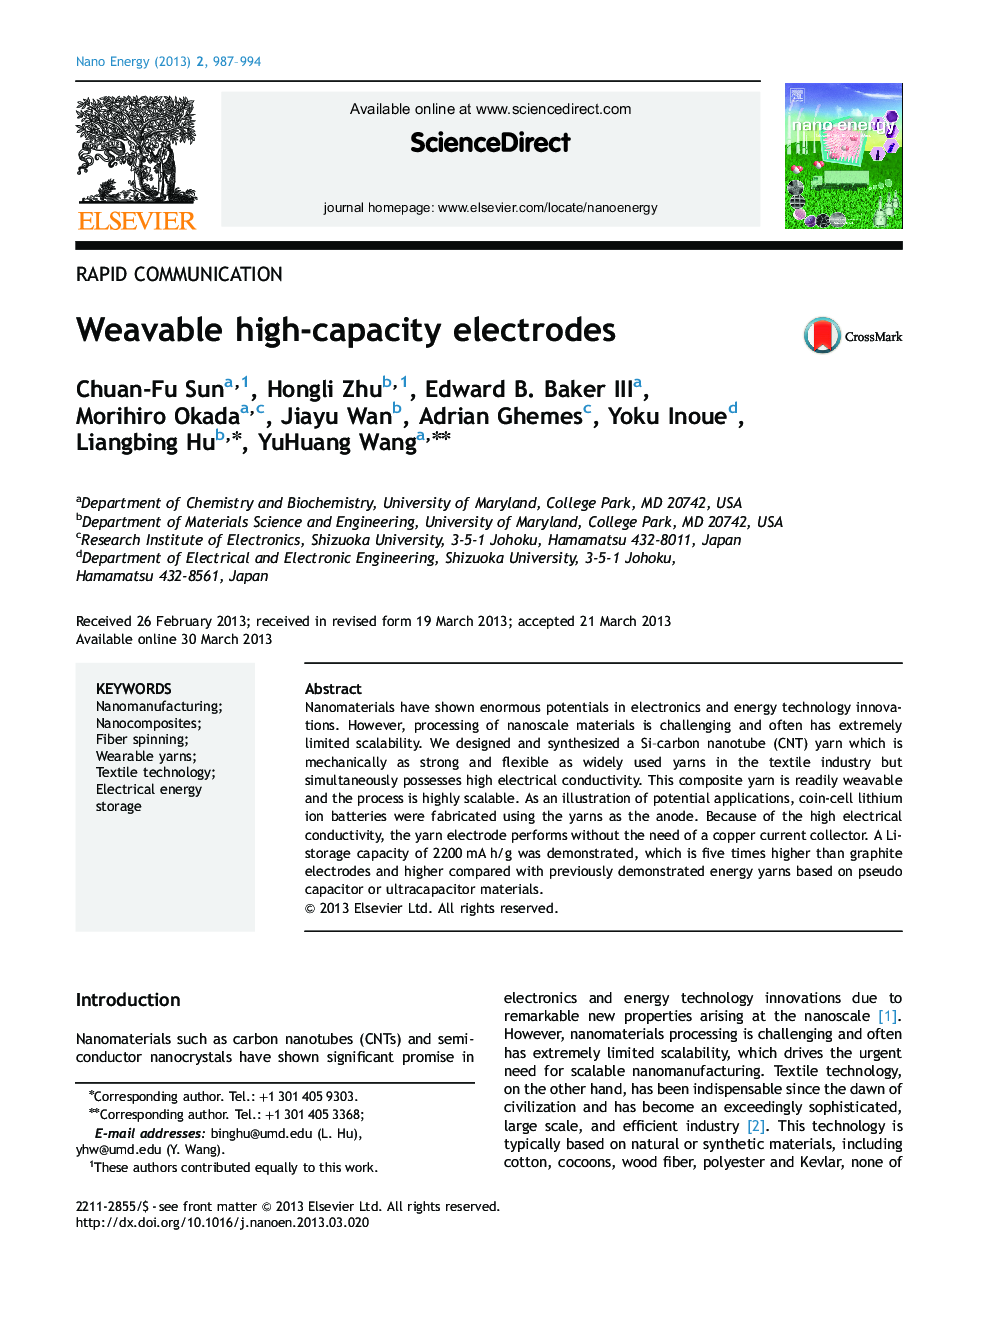 Weavable high-capacity electrodes